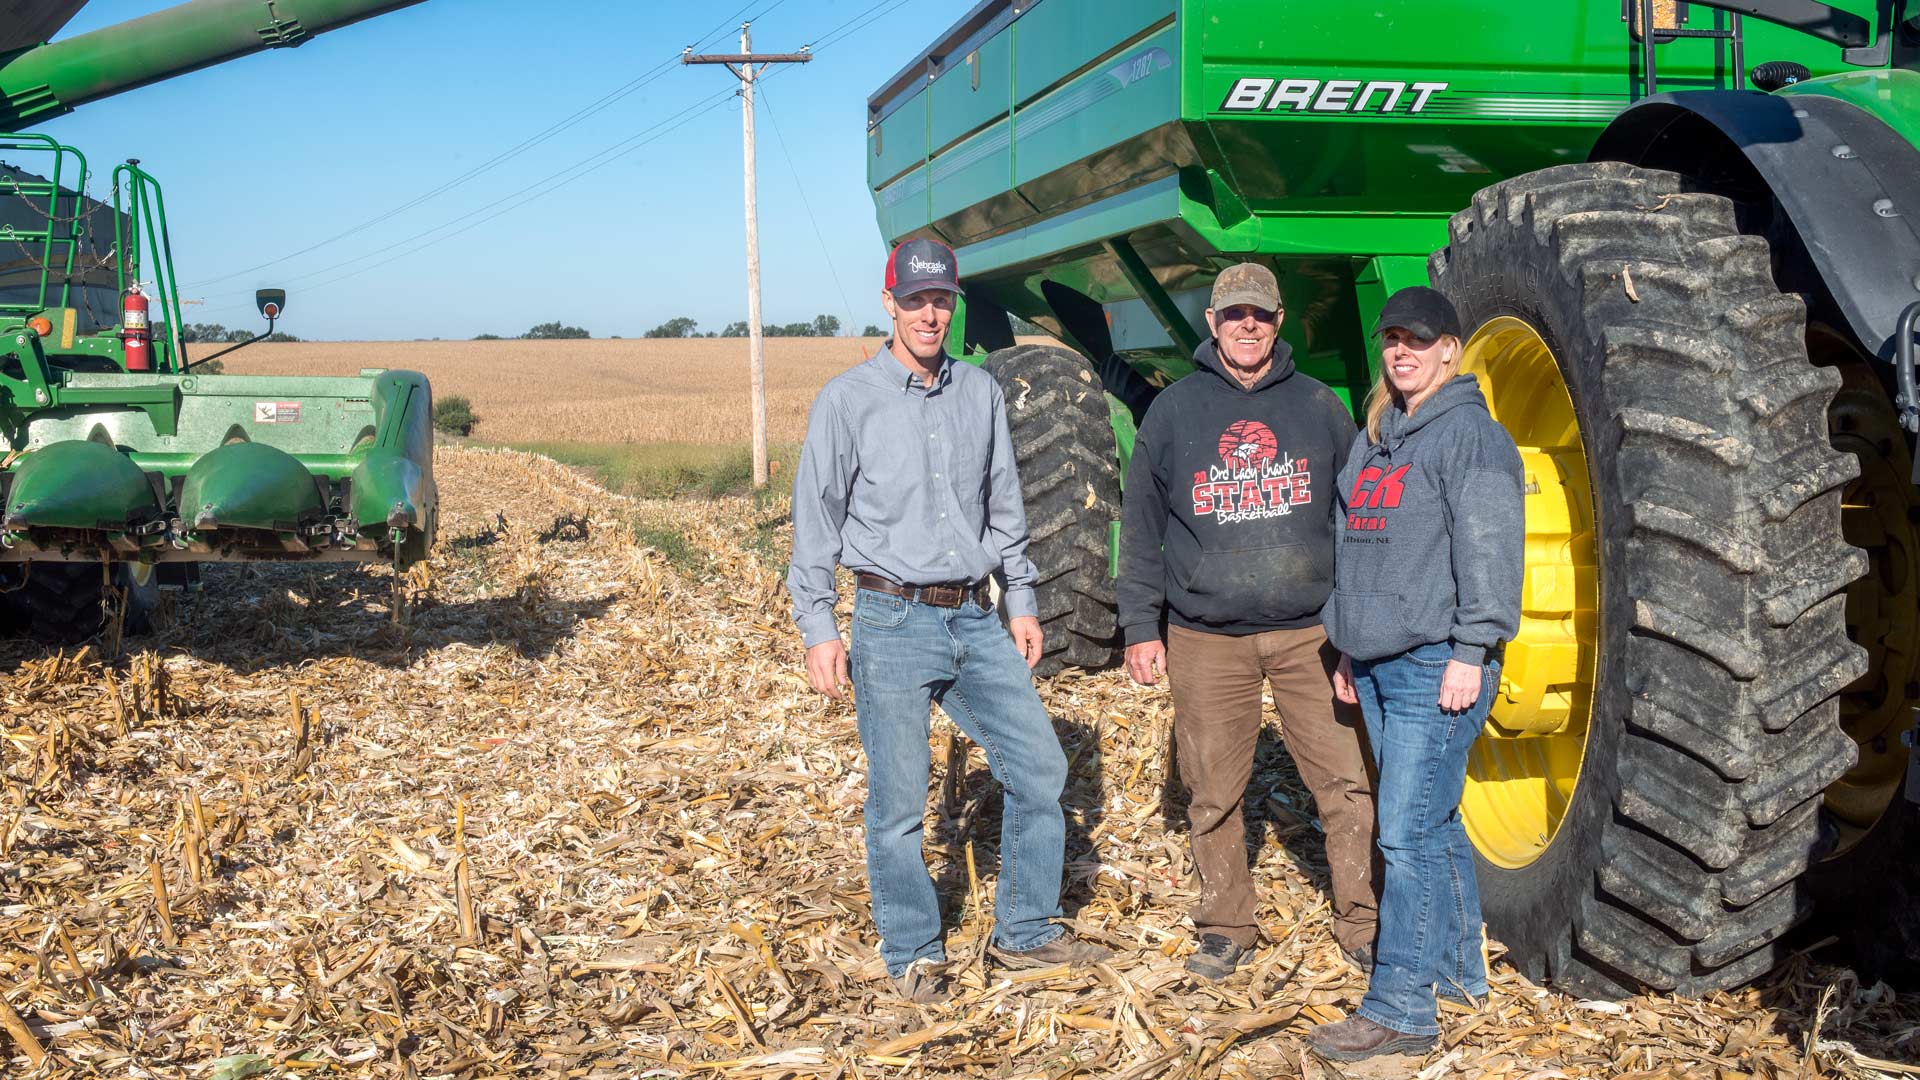 Three farmers stand next to farm equipment in a cornfield after harvest is complete.